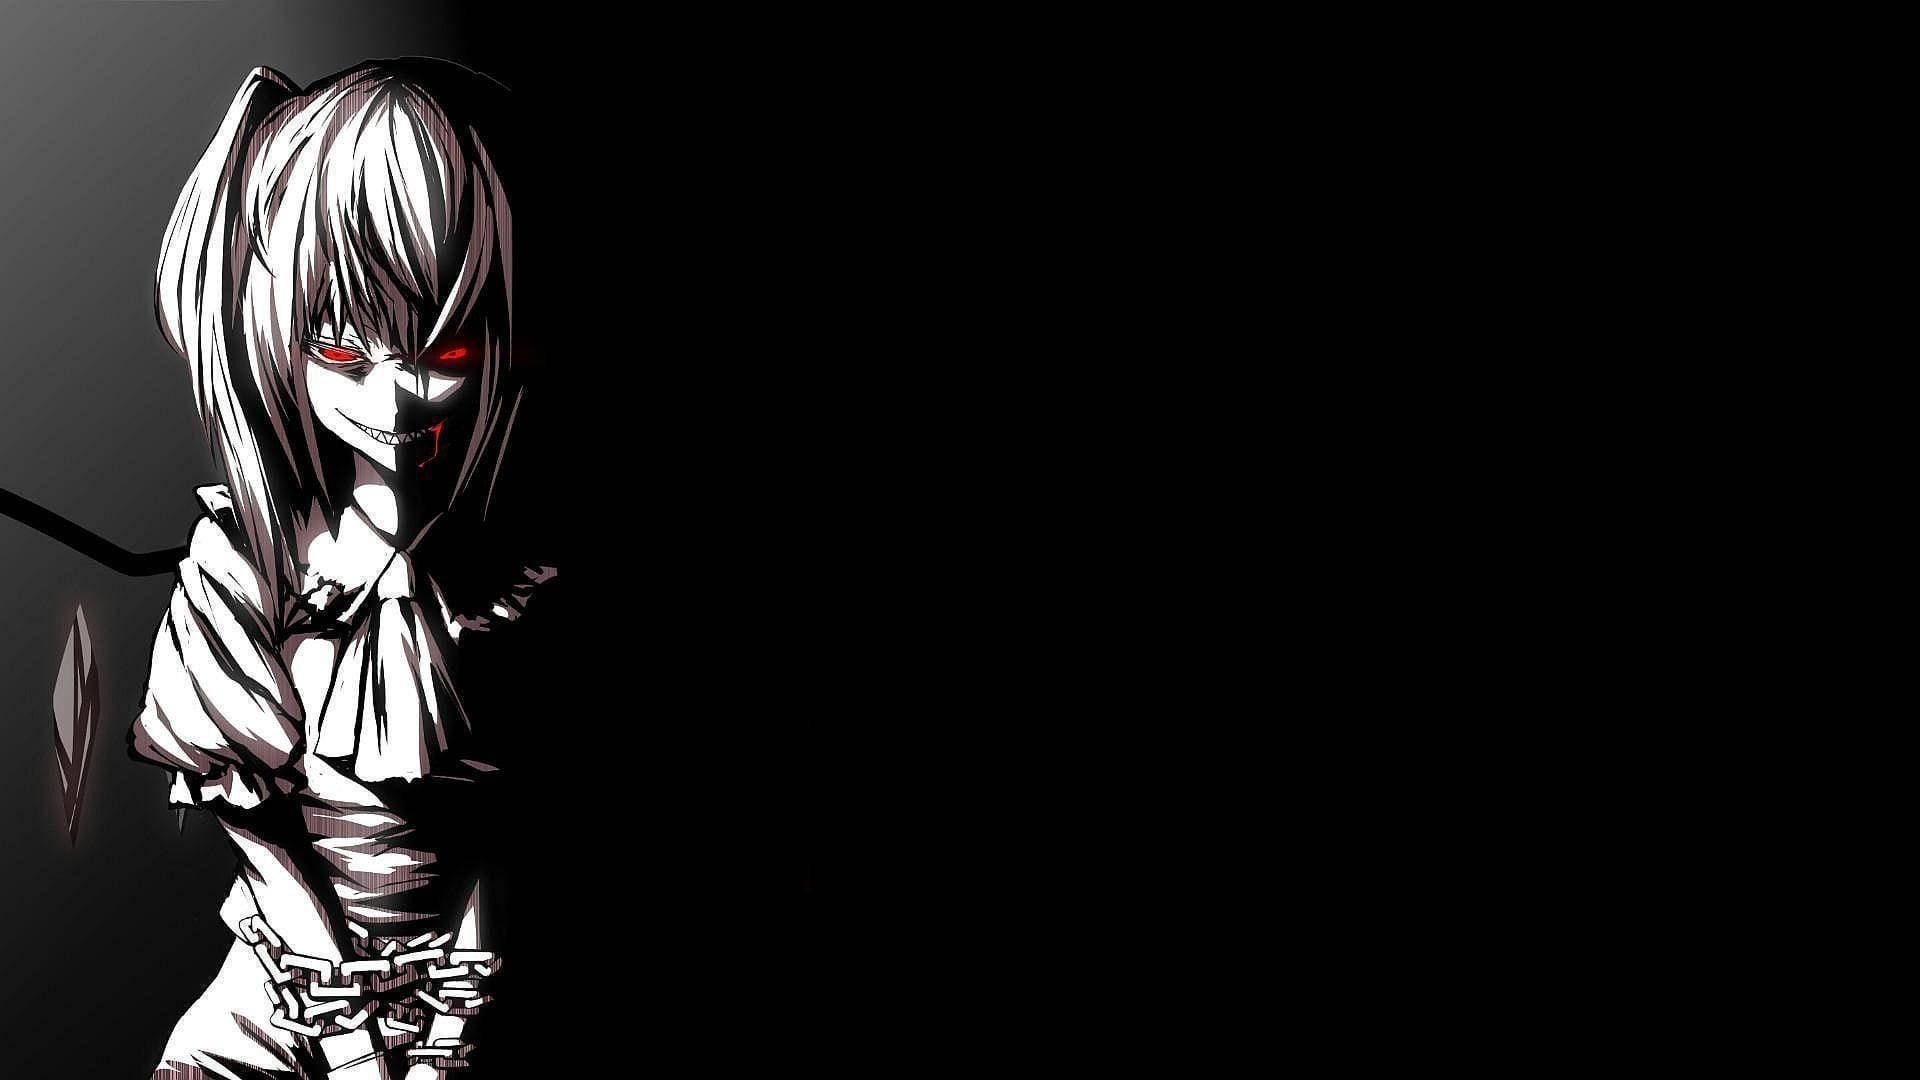 Caption: Flandre Scarlet Touhou Project: Aesthetic Black and White Profile Picture Wallpaper